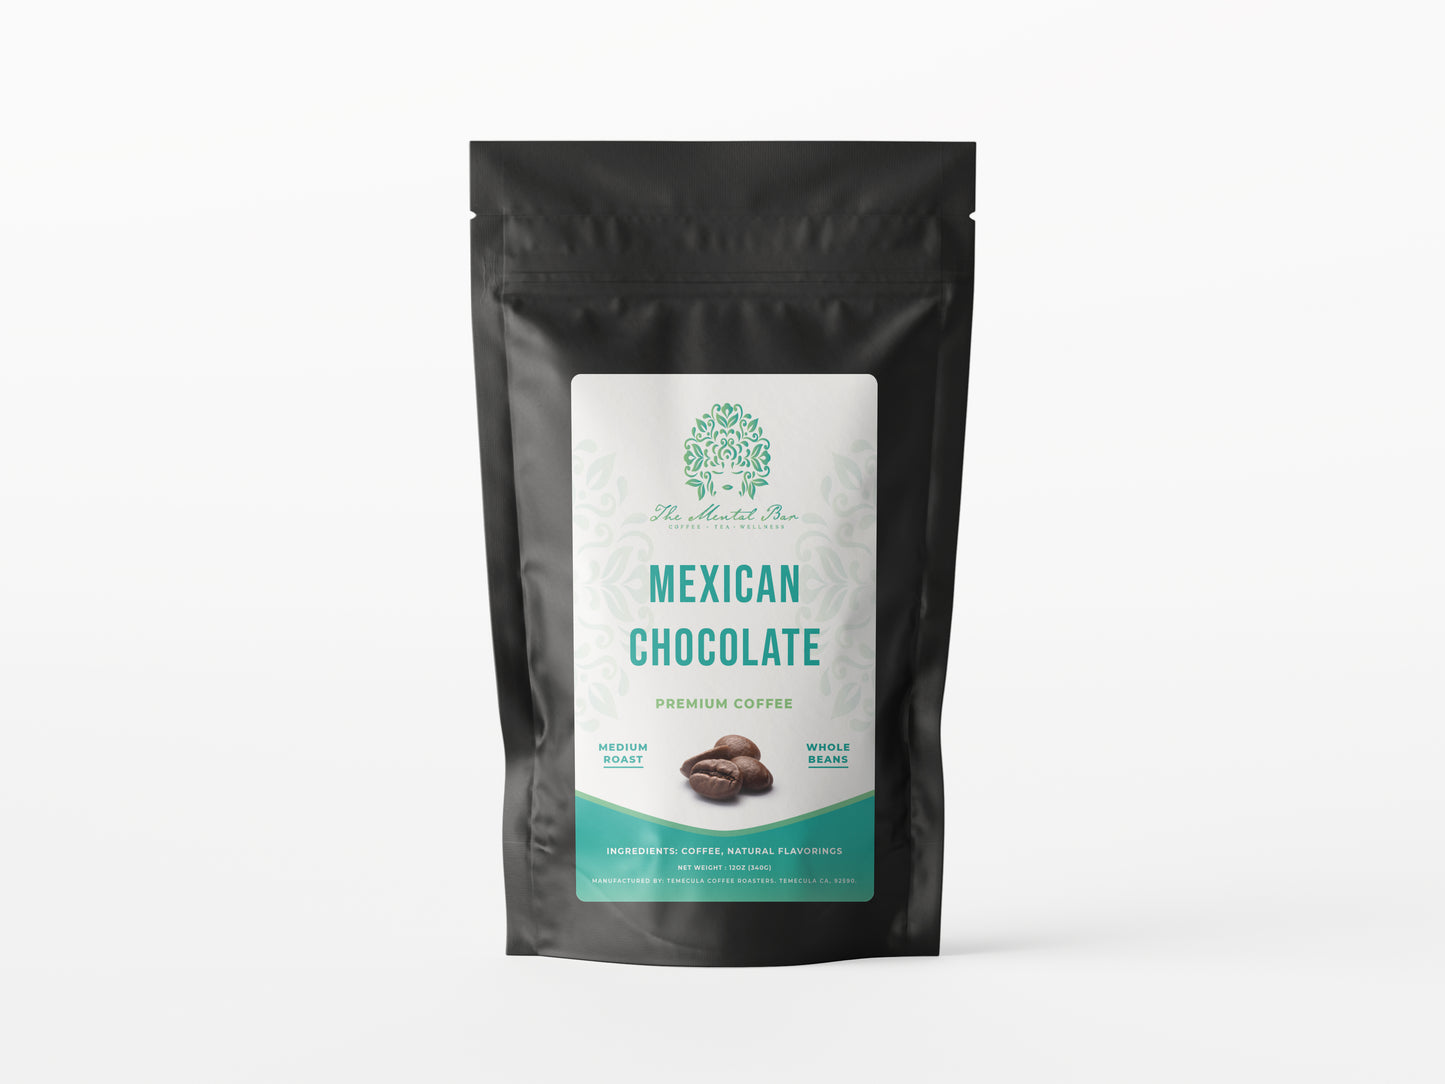 Mexican Chocolate - The Mental Bar